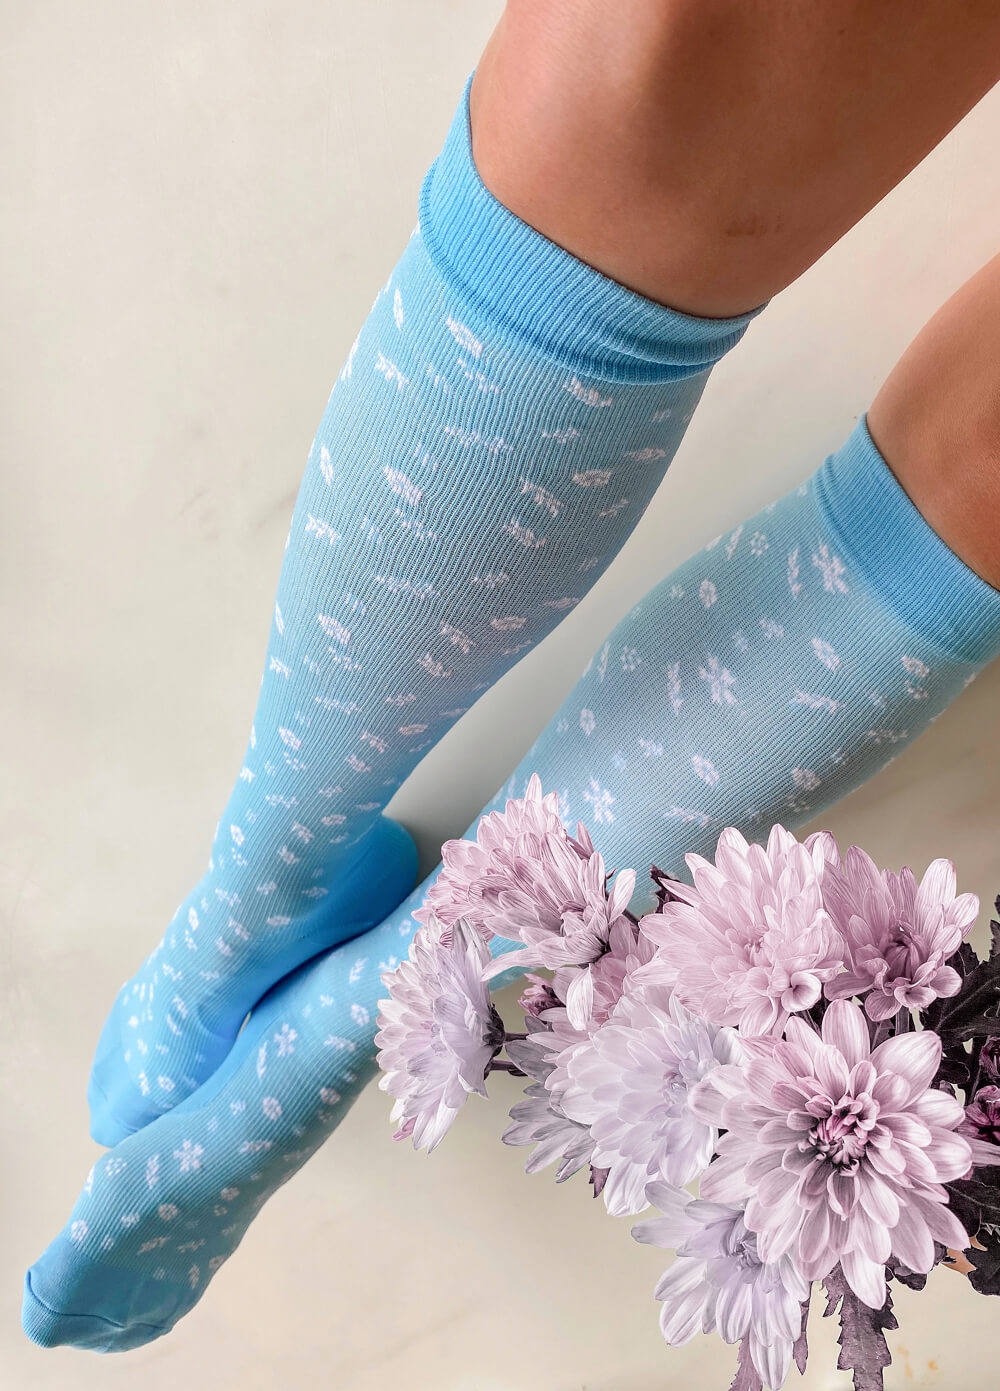 Mama Sox - Excite Compression Socks in Blue Floral